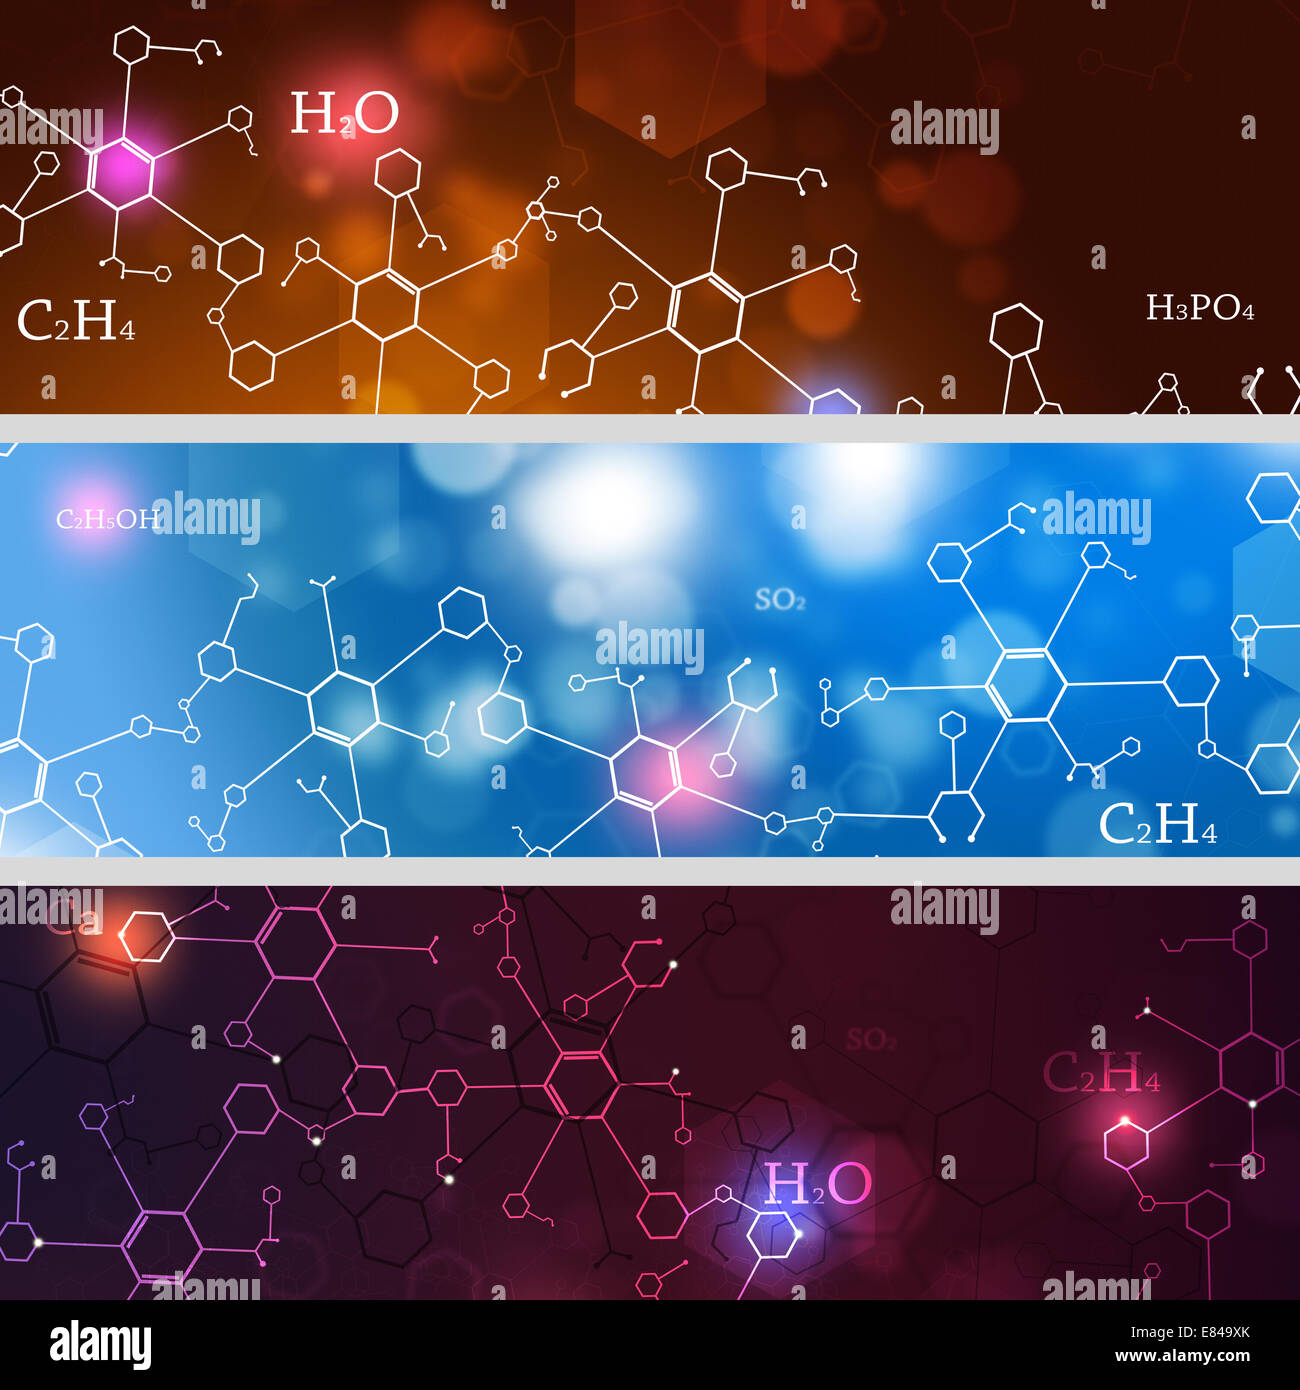 abstract technology and science banners with chemistry elements Stock Photo